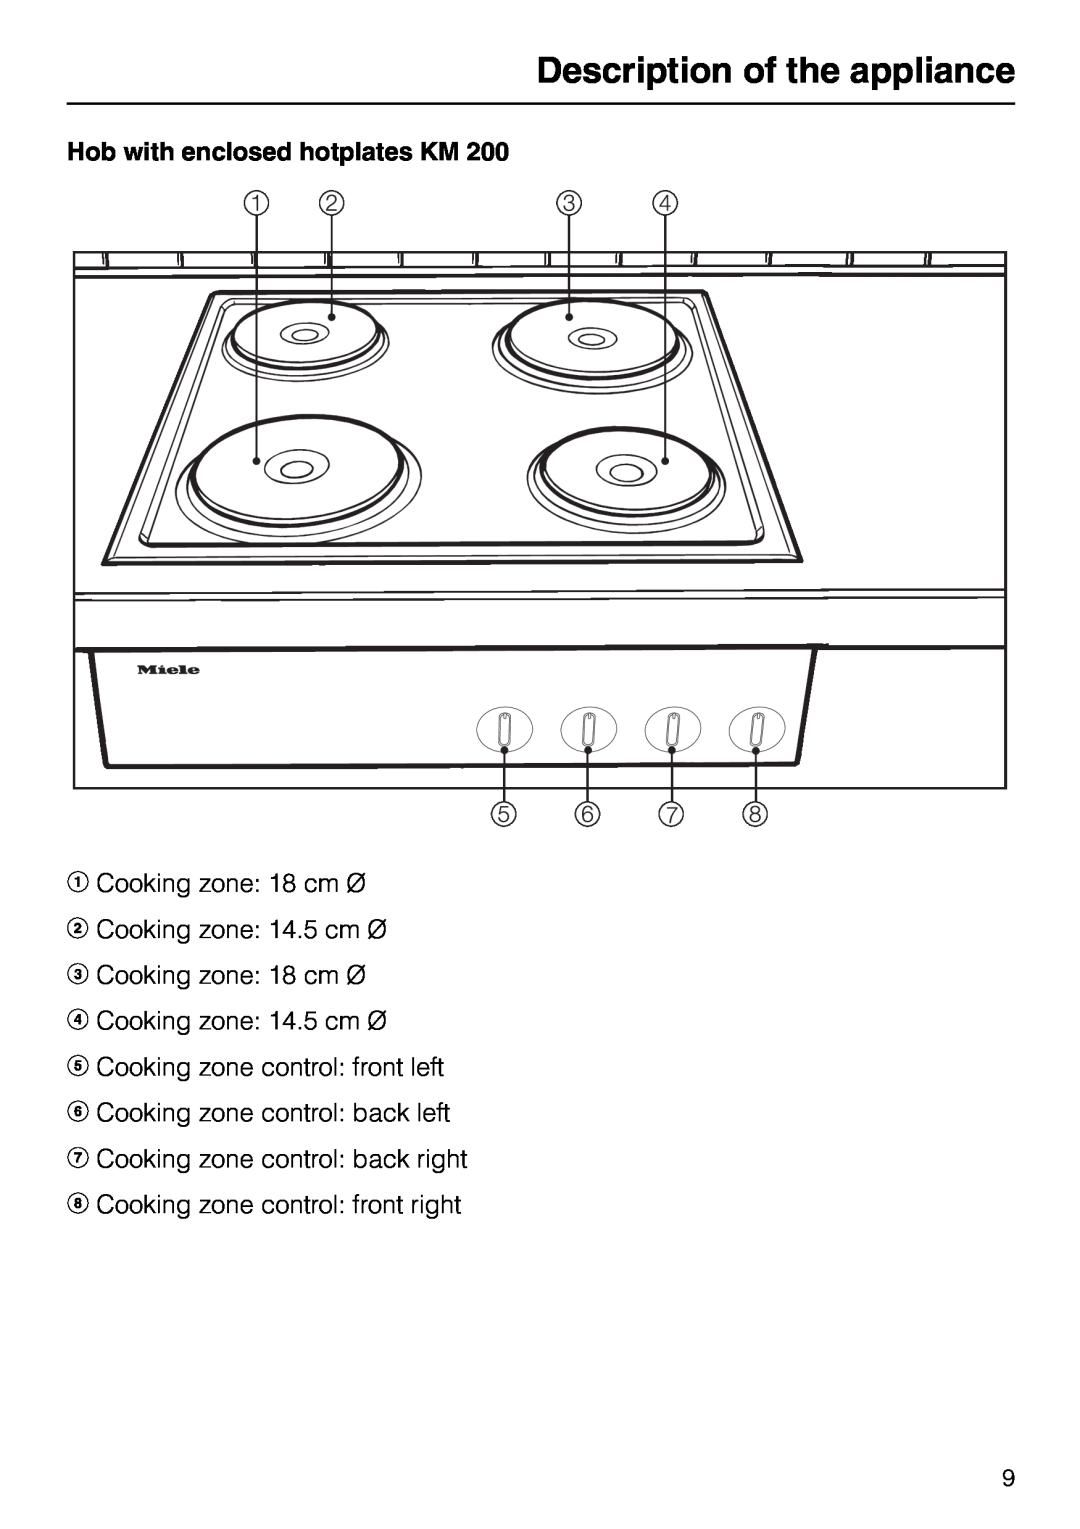 Miele H 316 Hob with enclosed hotplates KM, Description of the appliance, b Cooking zone 18 cm Ø c Cooking zone 14.5 cm Ø 